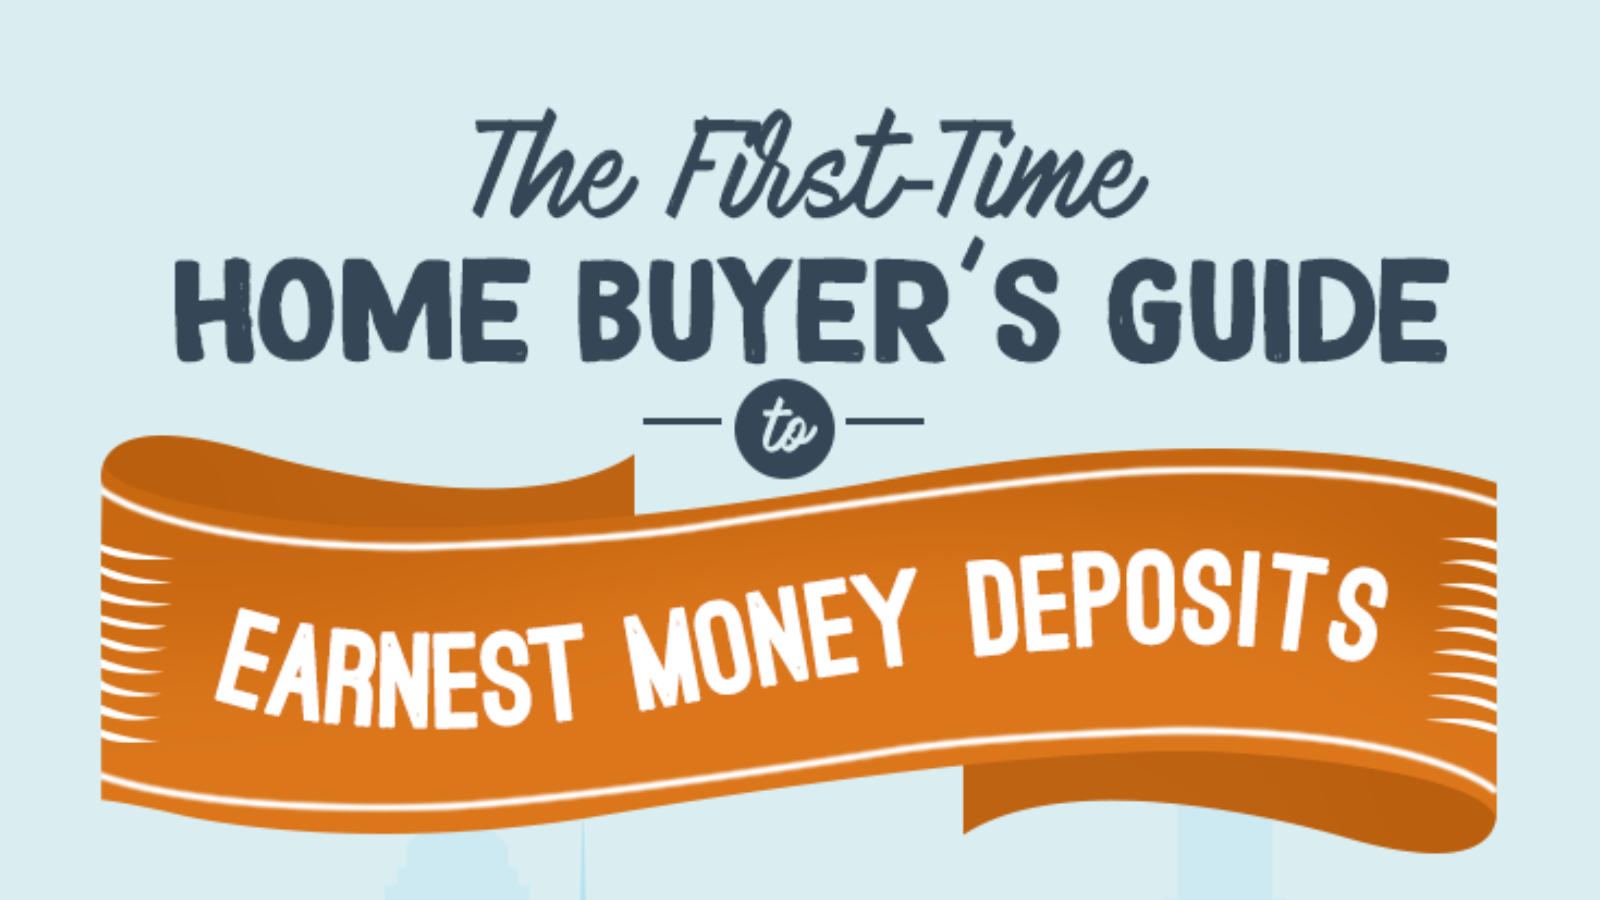 The First-Time Home Buyer's Guide To Earnest Money Deposits